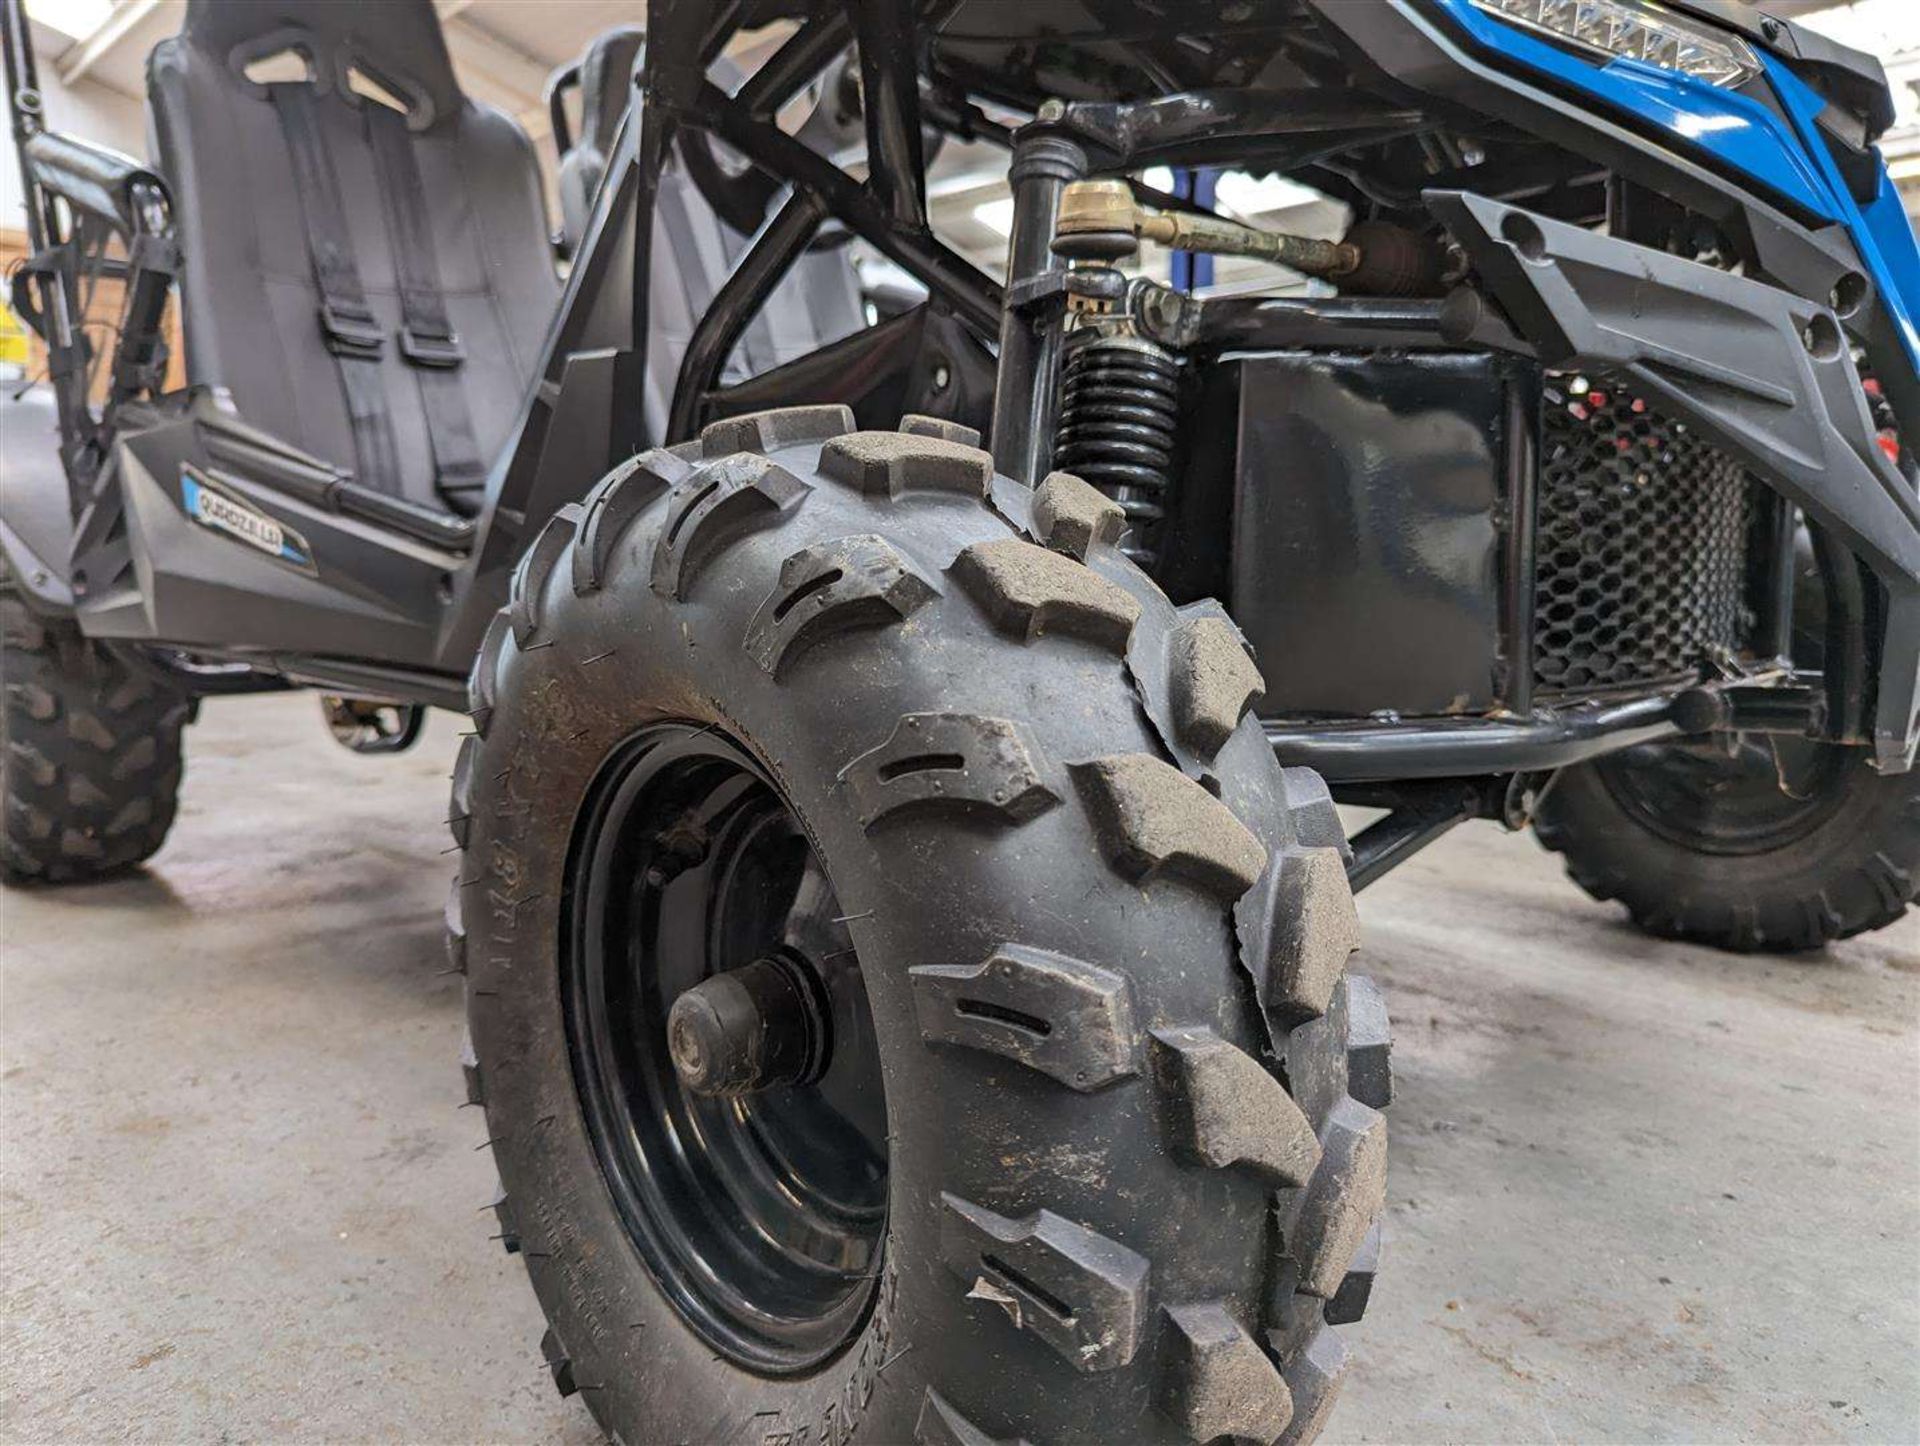 Off-Road Buggy - Image 11 of 13